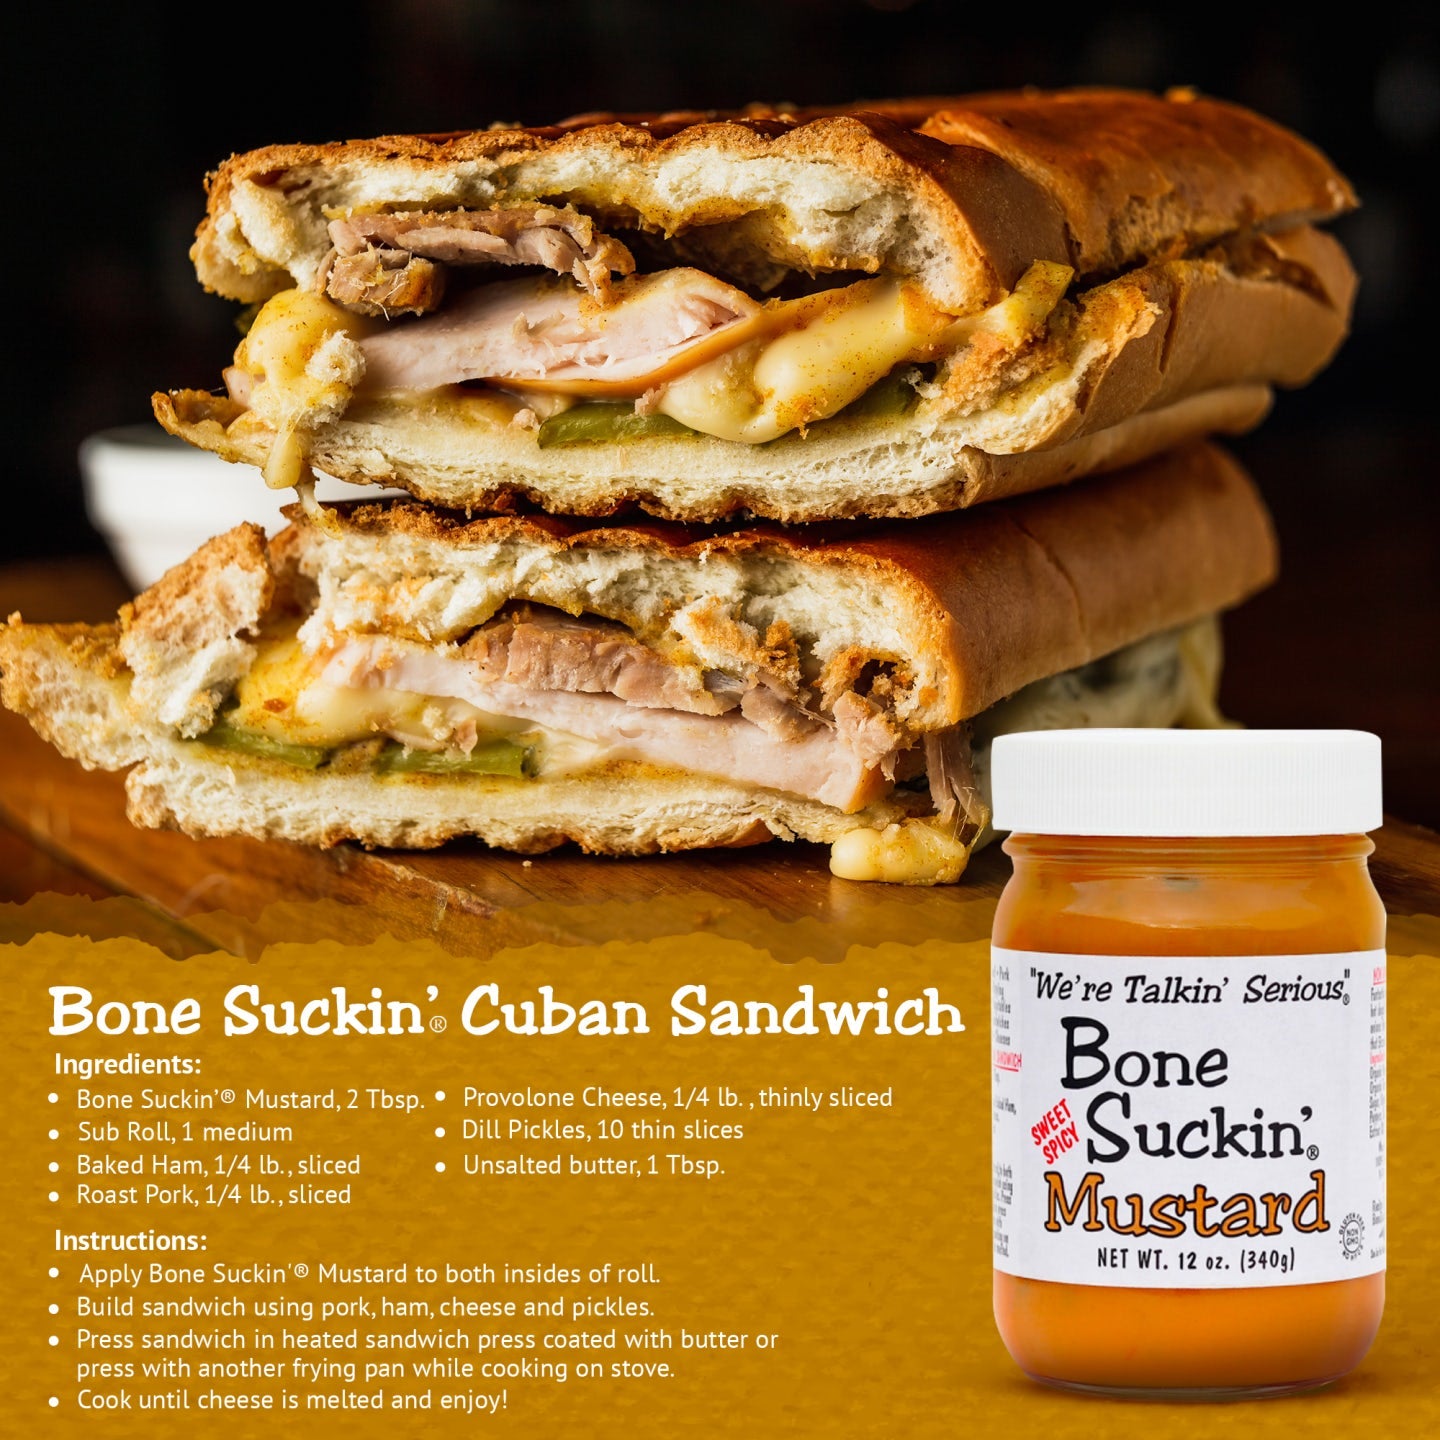 Bone Suckin'® Cuban Sandwich recipe. Ingredients: Bone Suckin' Mustard, 2 Tbsp, Sub roll, 1 medium, Baked Ham, Roast Pork, Unsalted butter, 1 Tbsp, Provolone Cheese, 1/4 lb, thinly sliced, Dill Pickles, 10 thin slices. Instructions: Apply Bone Suckin' Mustard to both insides of roll. Build sandwich using pork, ham, cheese and pickles. Press sandwich into heated sandwich press coated with butter or press another frying pan while cooking on stove. Cook until cheese is melted and enjoy